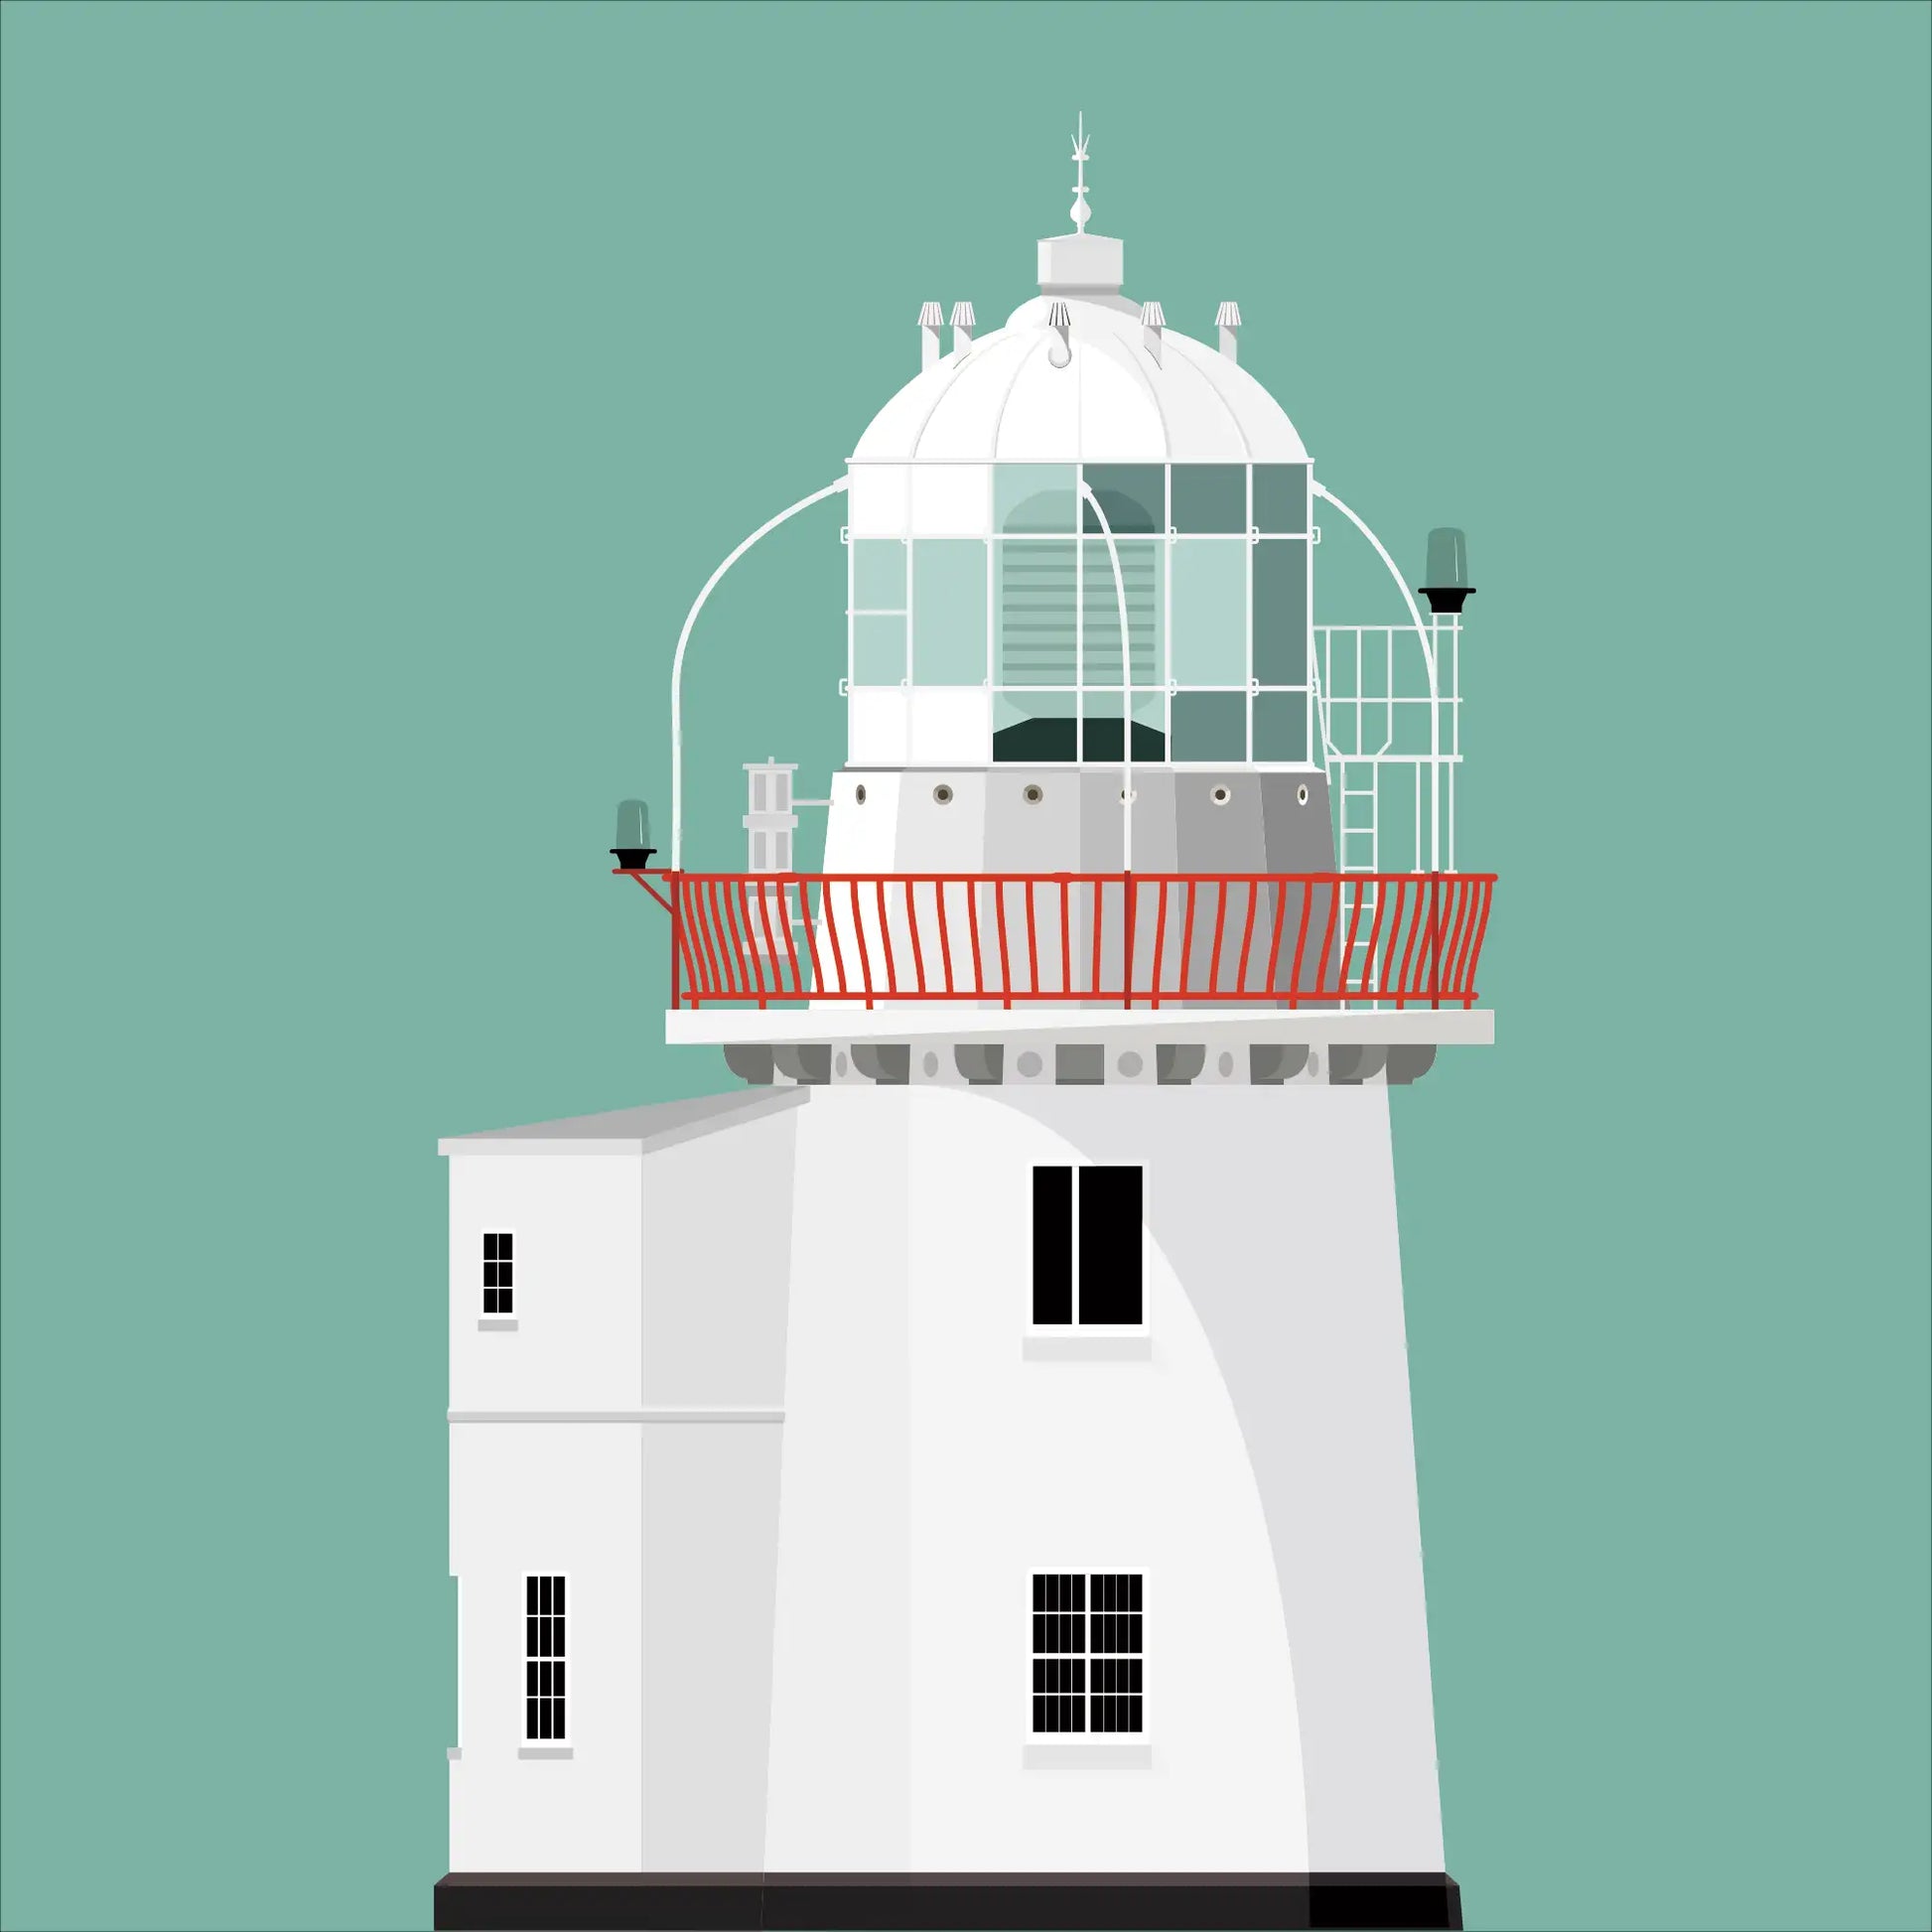 Illustration of Roches Point lighthouse on a white background inside light blue square.